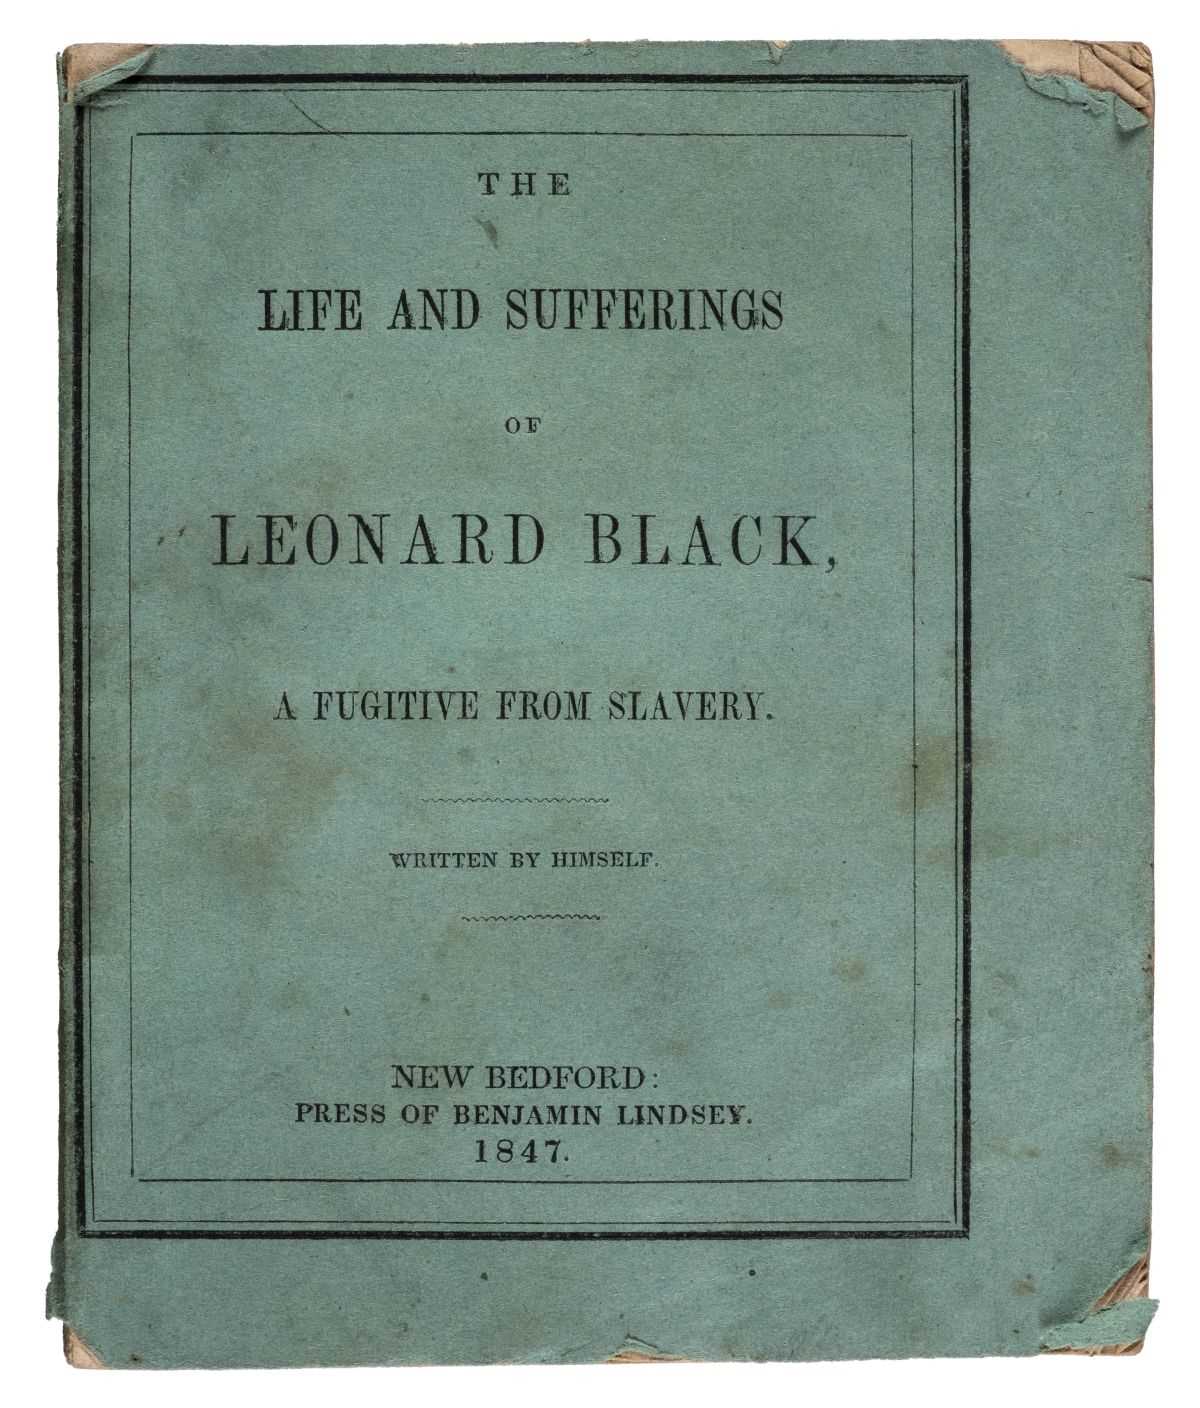 Lot 172 - Slave Narrative. The Life and Sufferings of Leonard Black, 1847